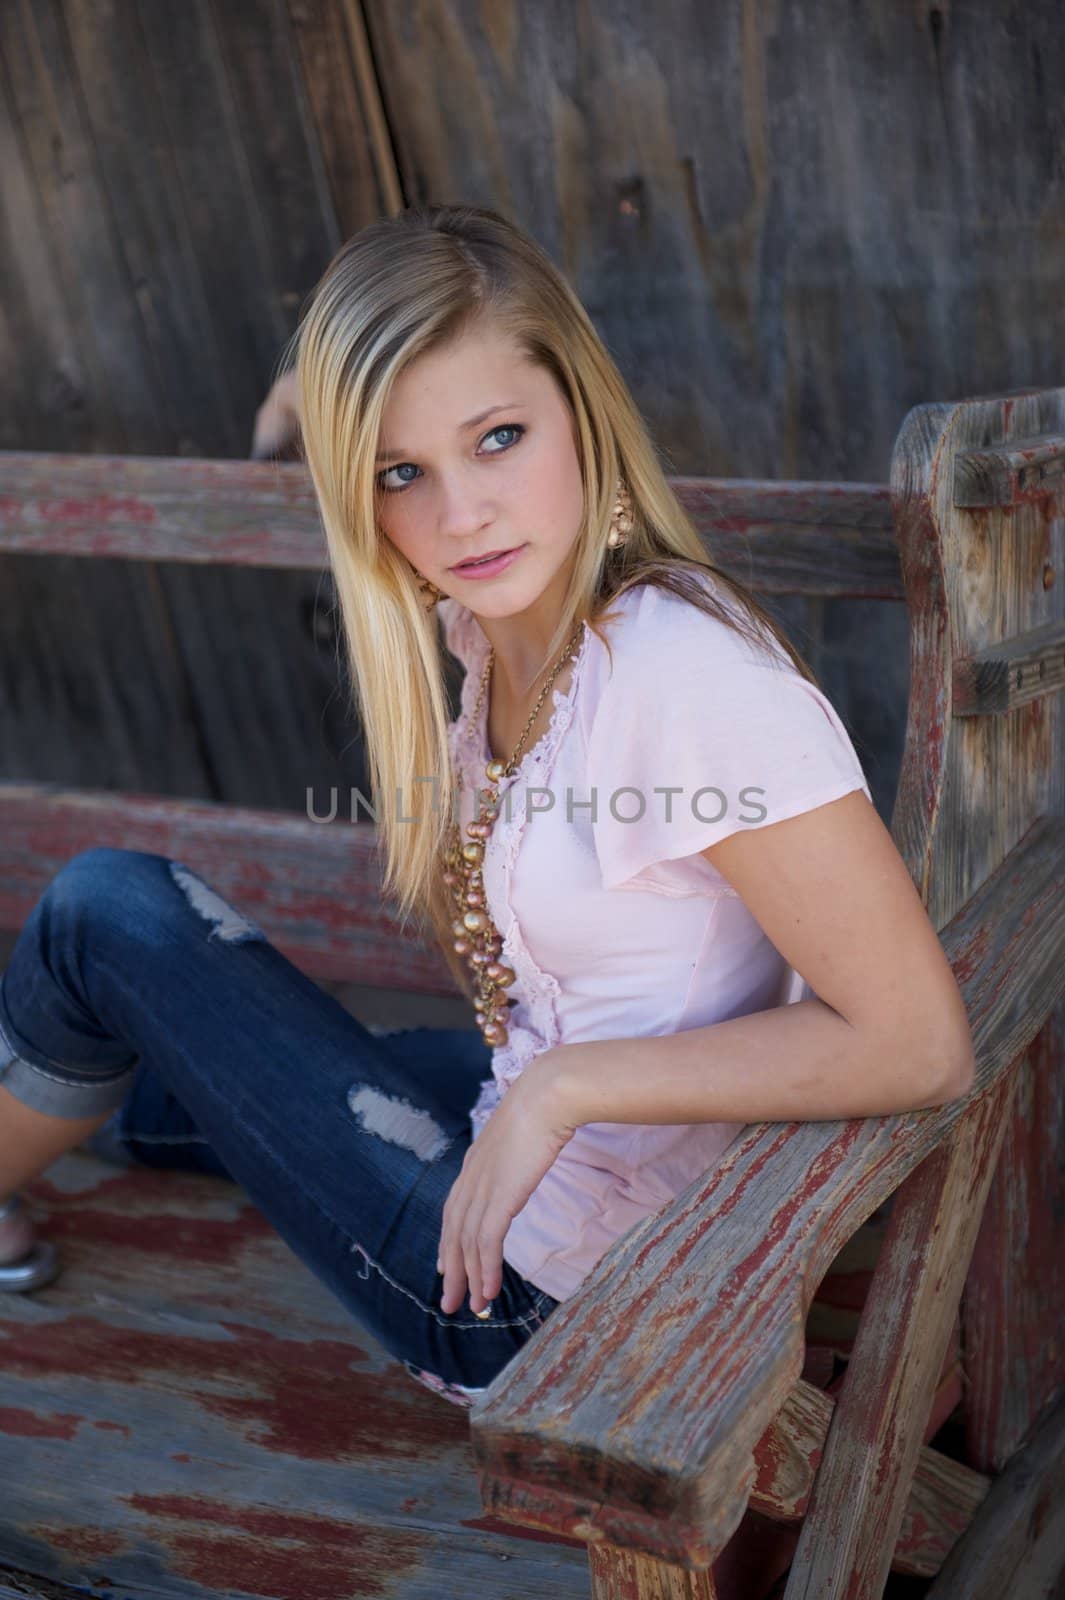 Beautiful Blonde Girl on Wooden Bench by pixelsnap